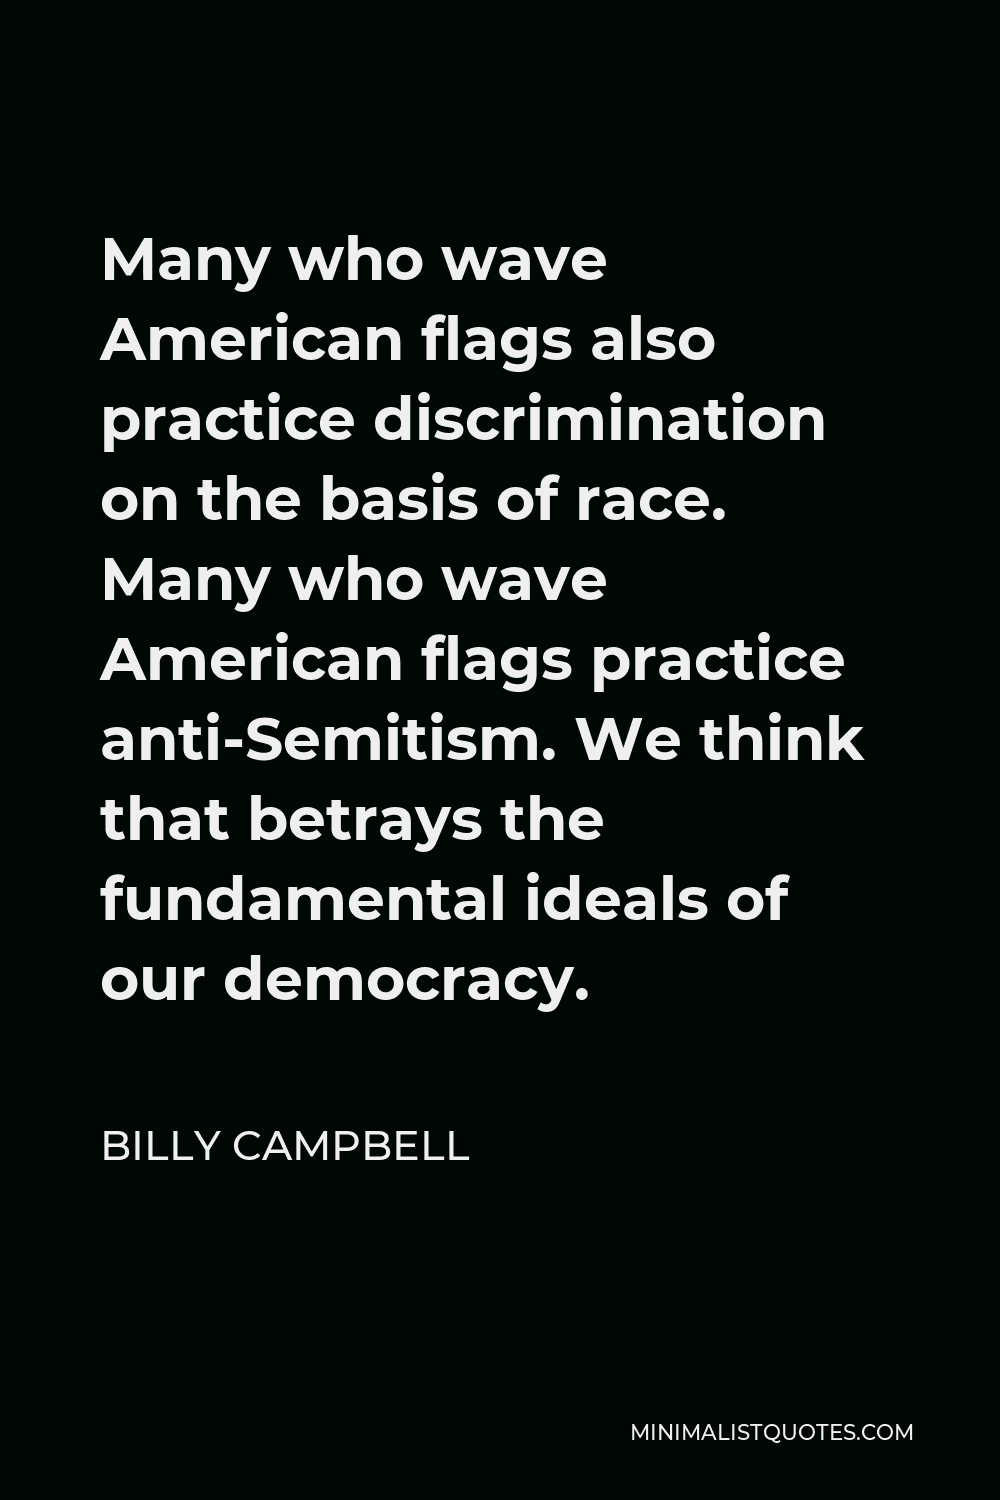 Billy Campbell Quote - Many who wave American flags also practice discrimination on the basis of race. Many who wave American flags practice anti-Semitism. We think that betrays the fundamental ideals of our democracy.